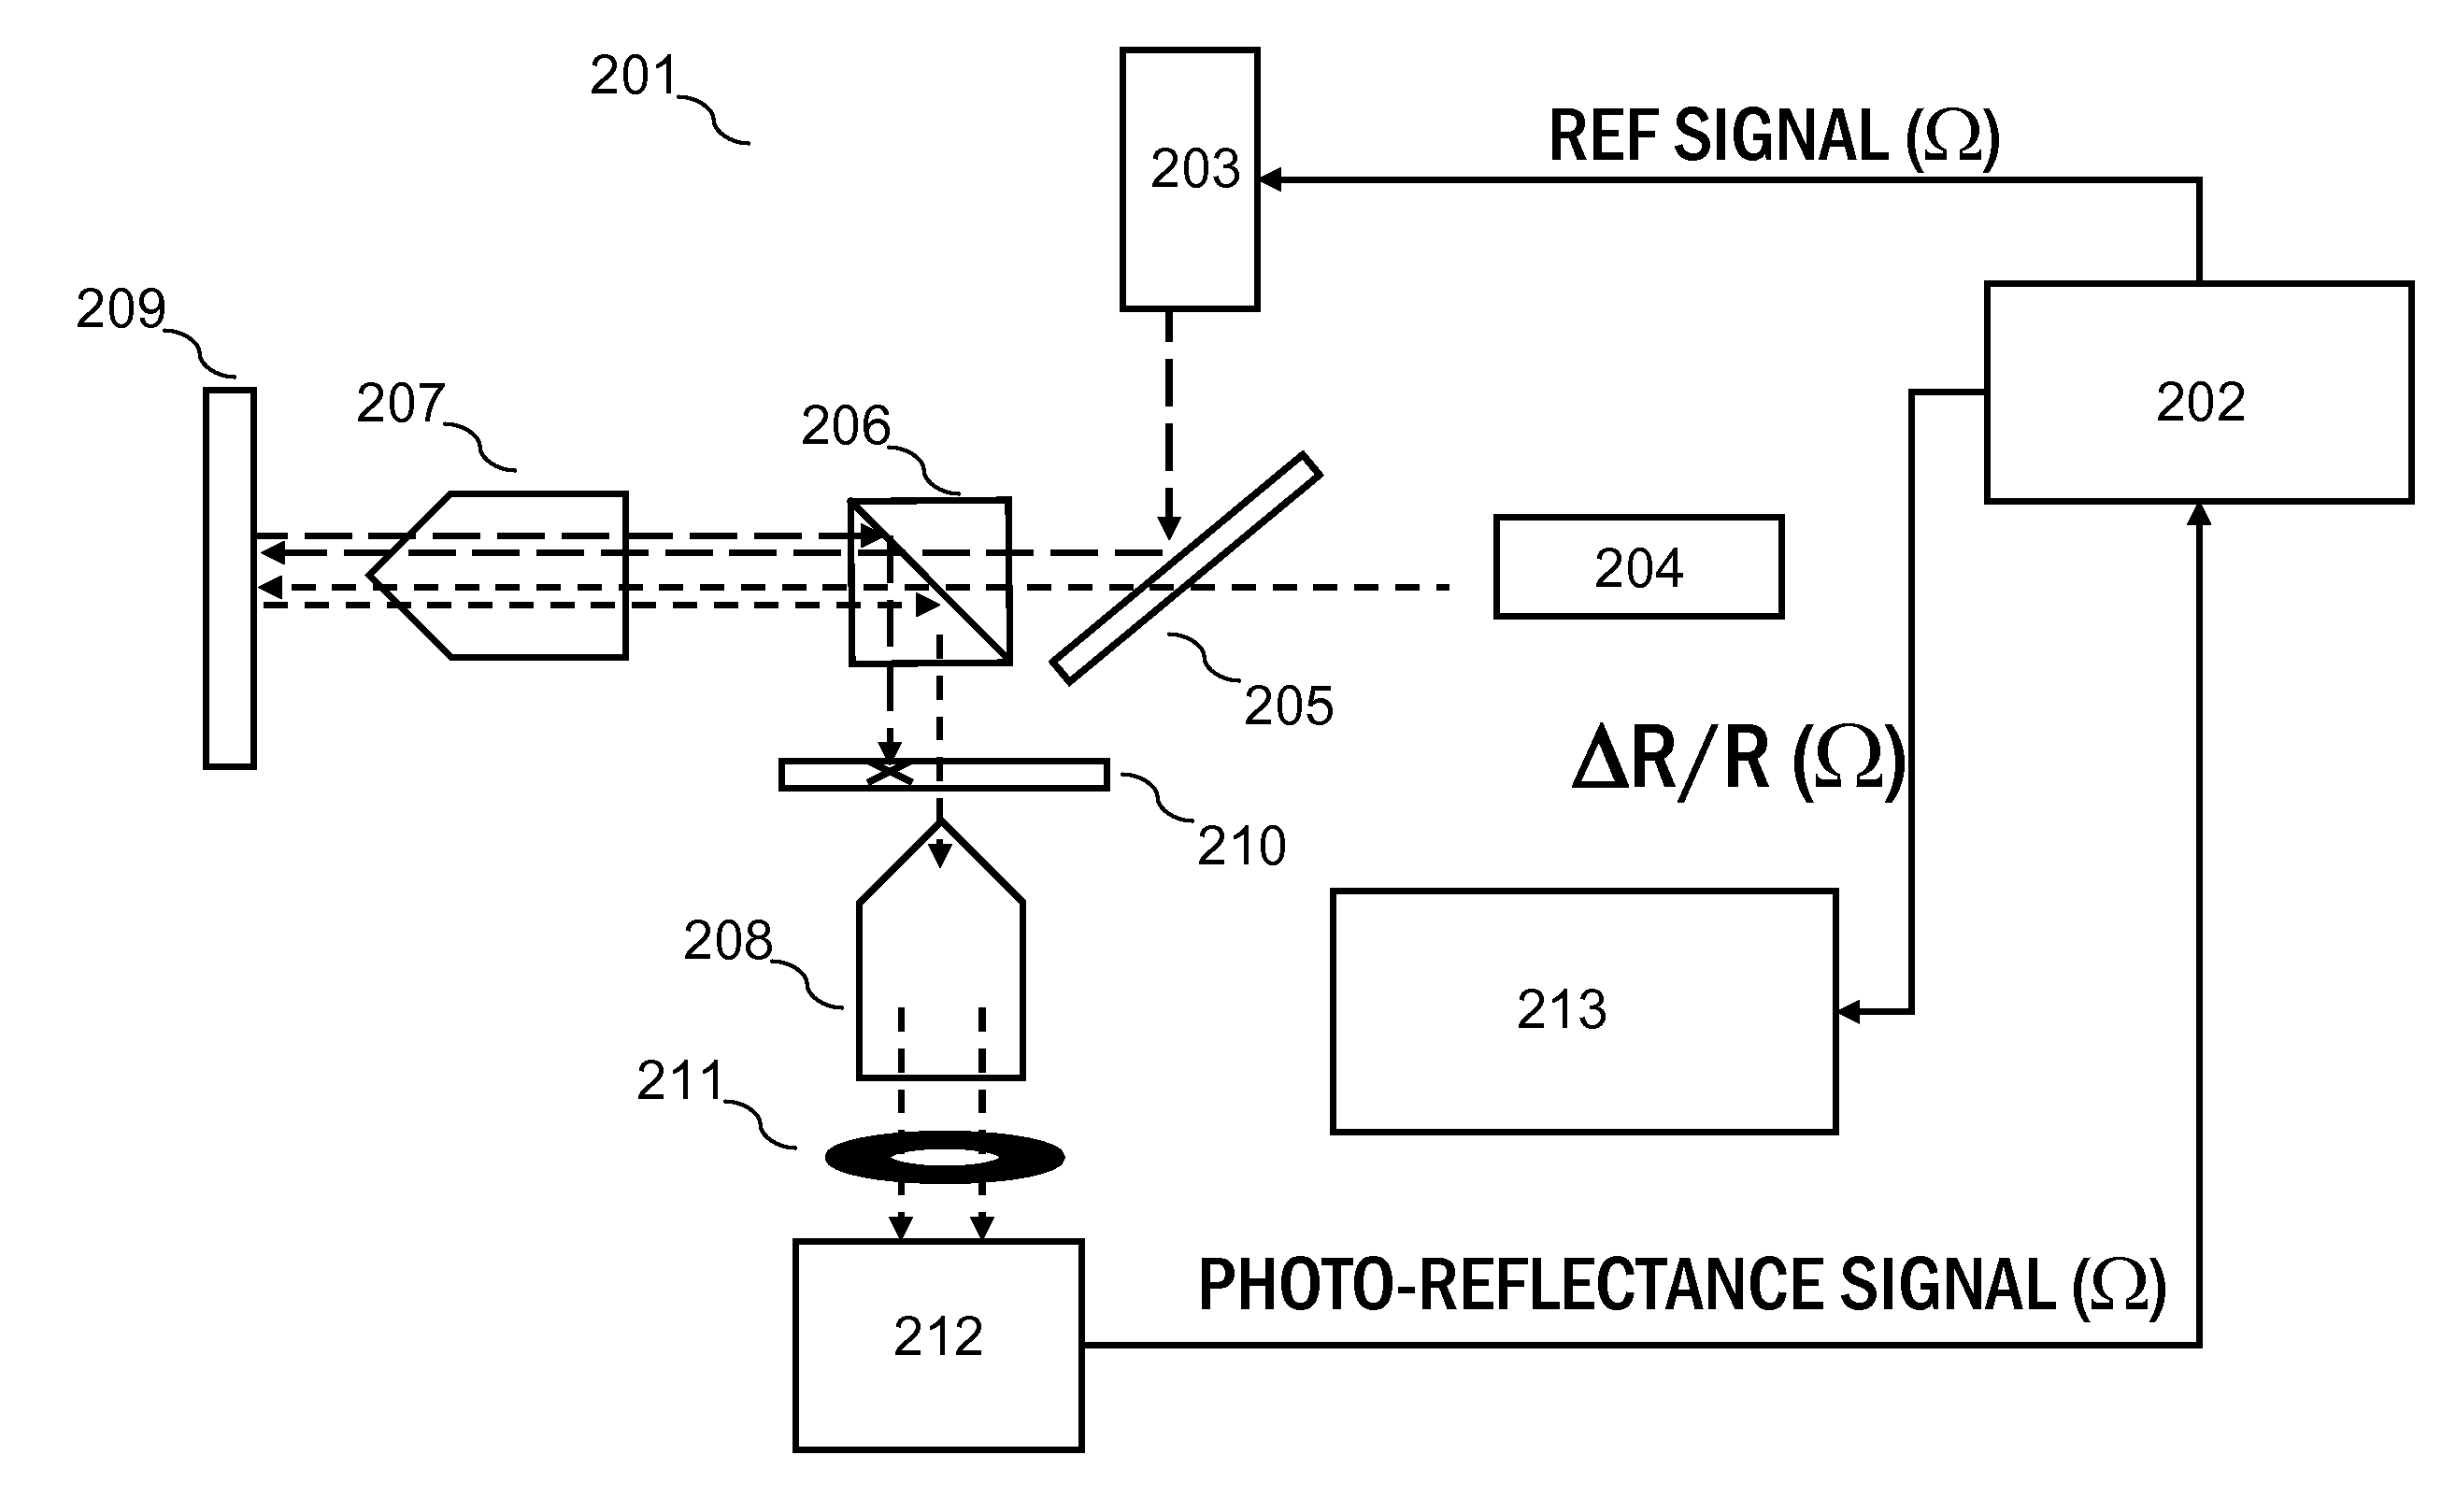 Method and apparatus of z-scan photoreflectance characterization